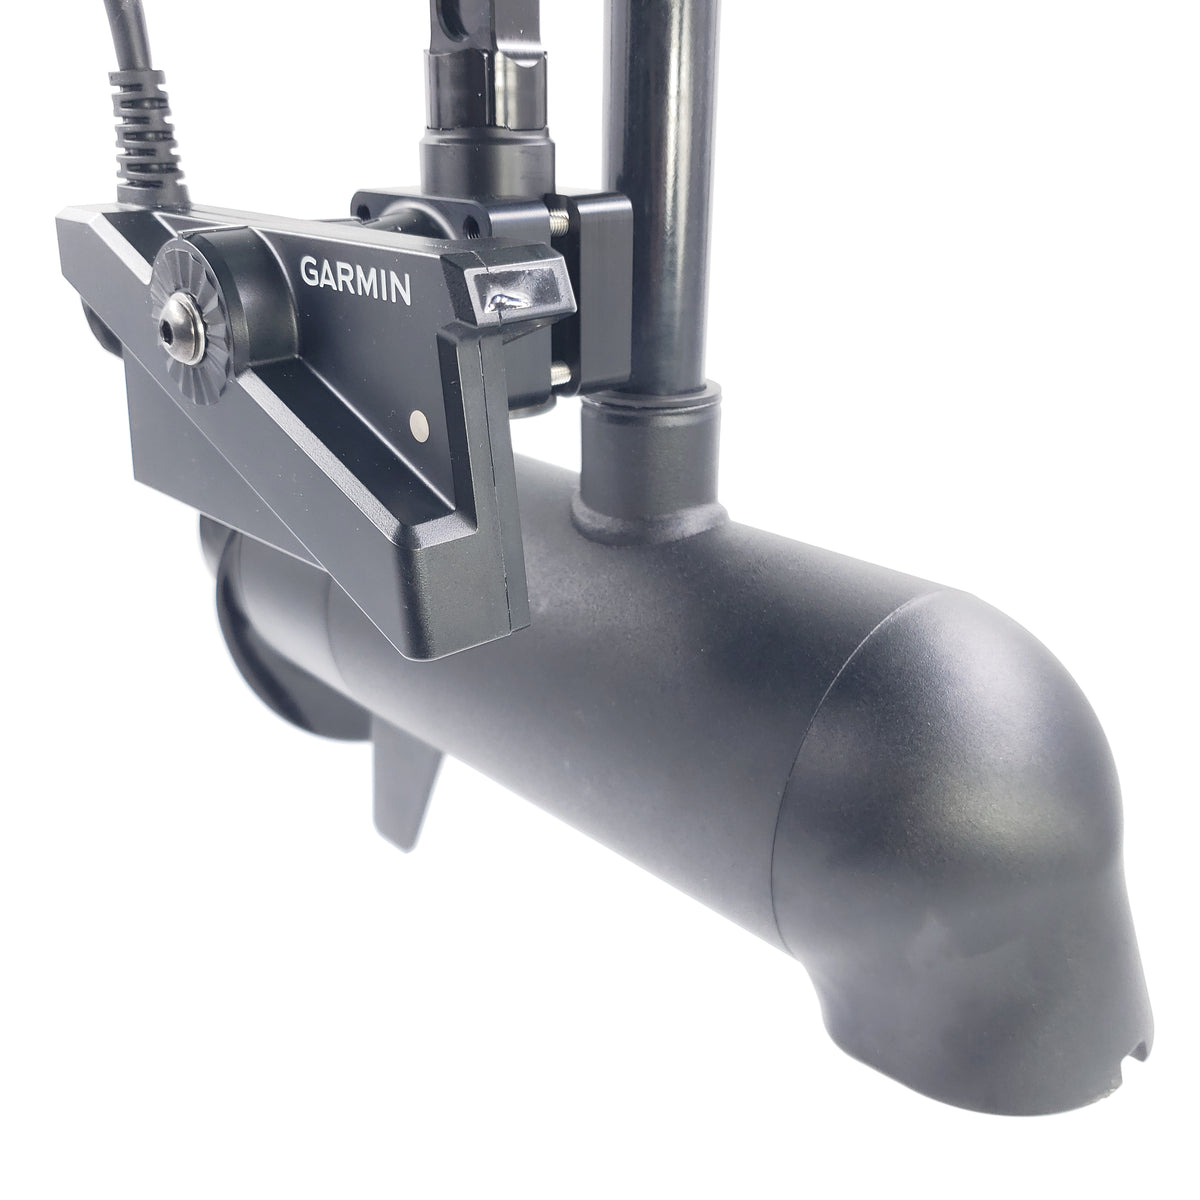 Livescope transducer mount location - let's see them!